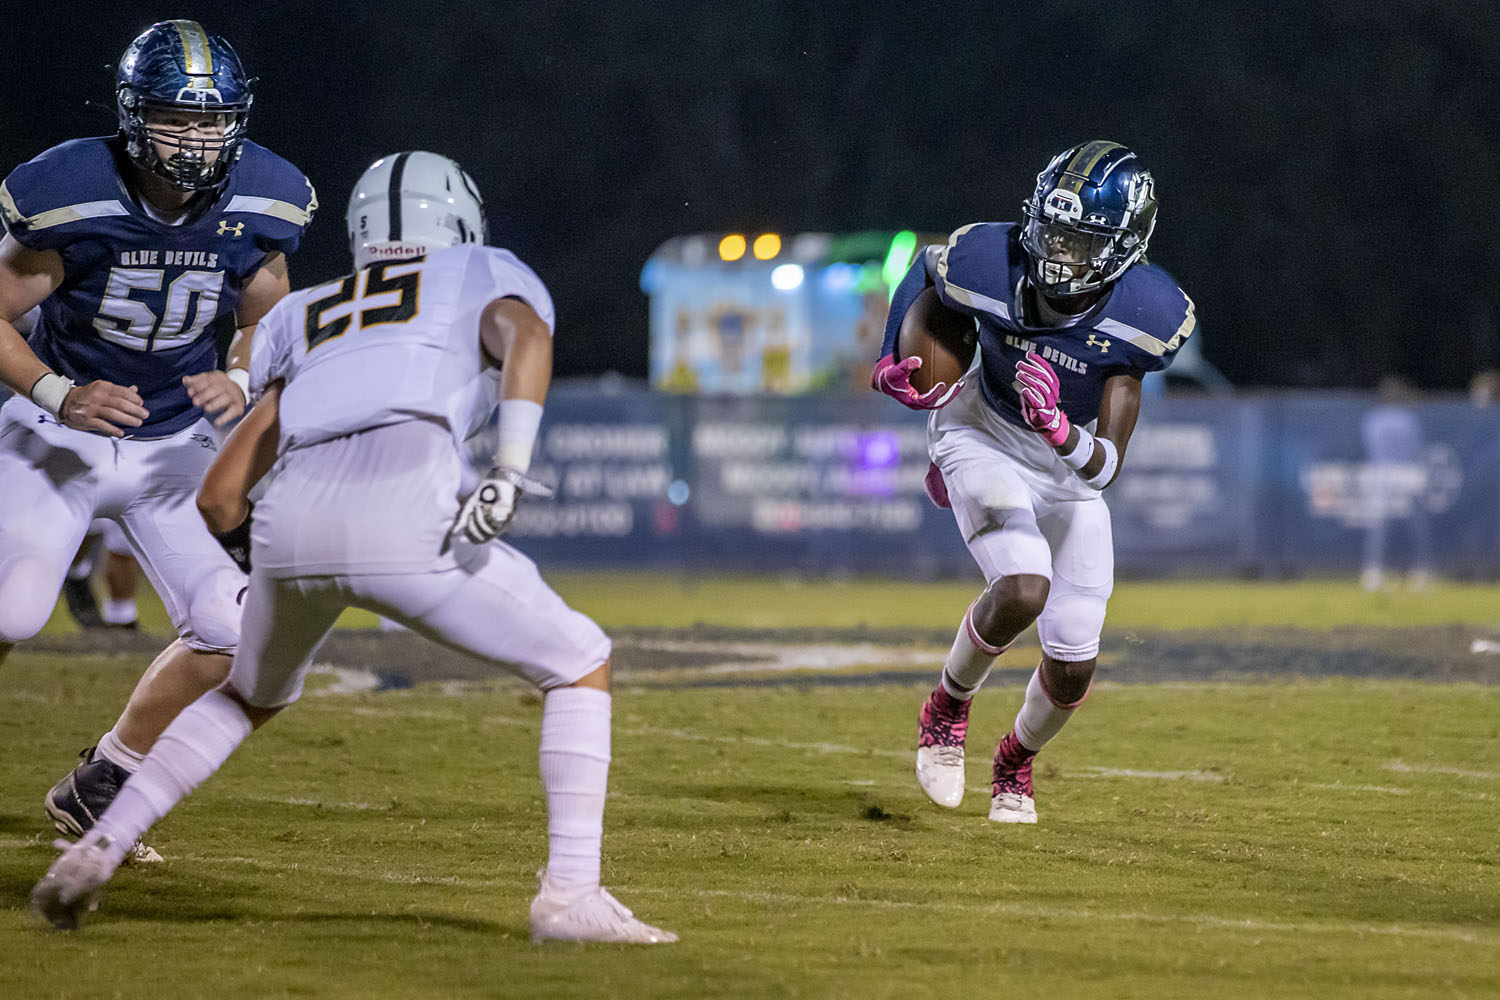 Moody ready to turn things around as Blue Devils travel to Elmore County